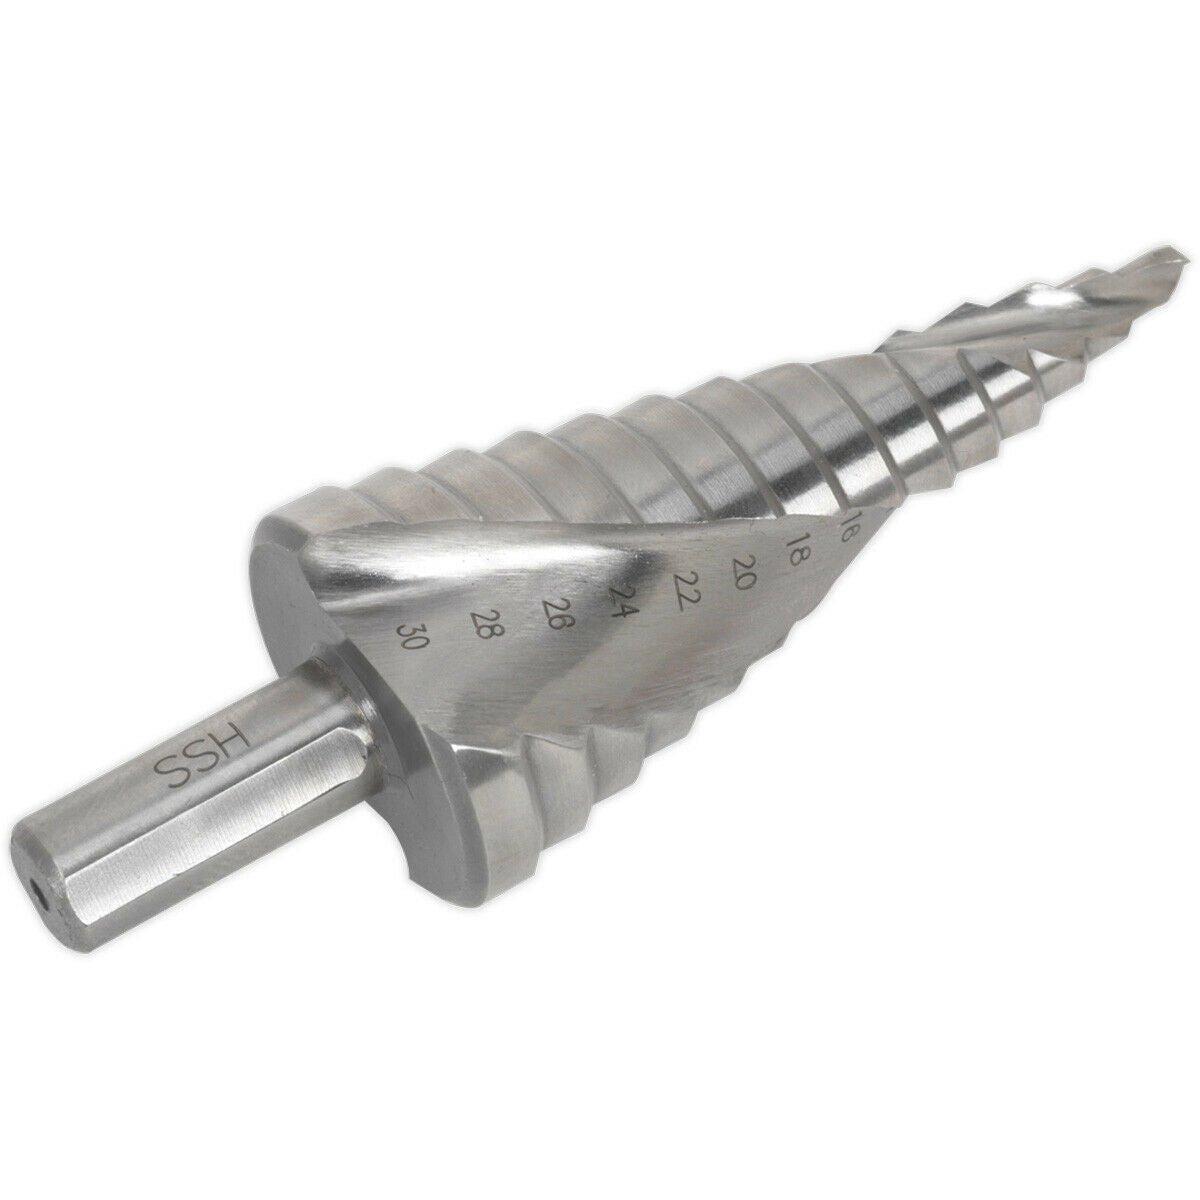 HSS M2 Spiral Flute Step Drill Bit - 4mm to 30mm - Precision Hole Drilling